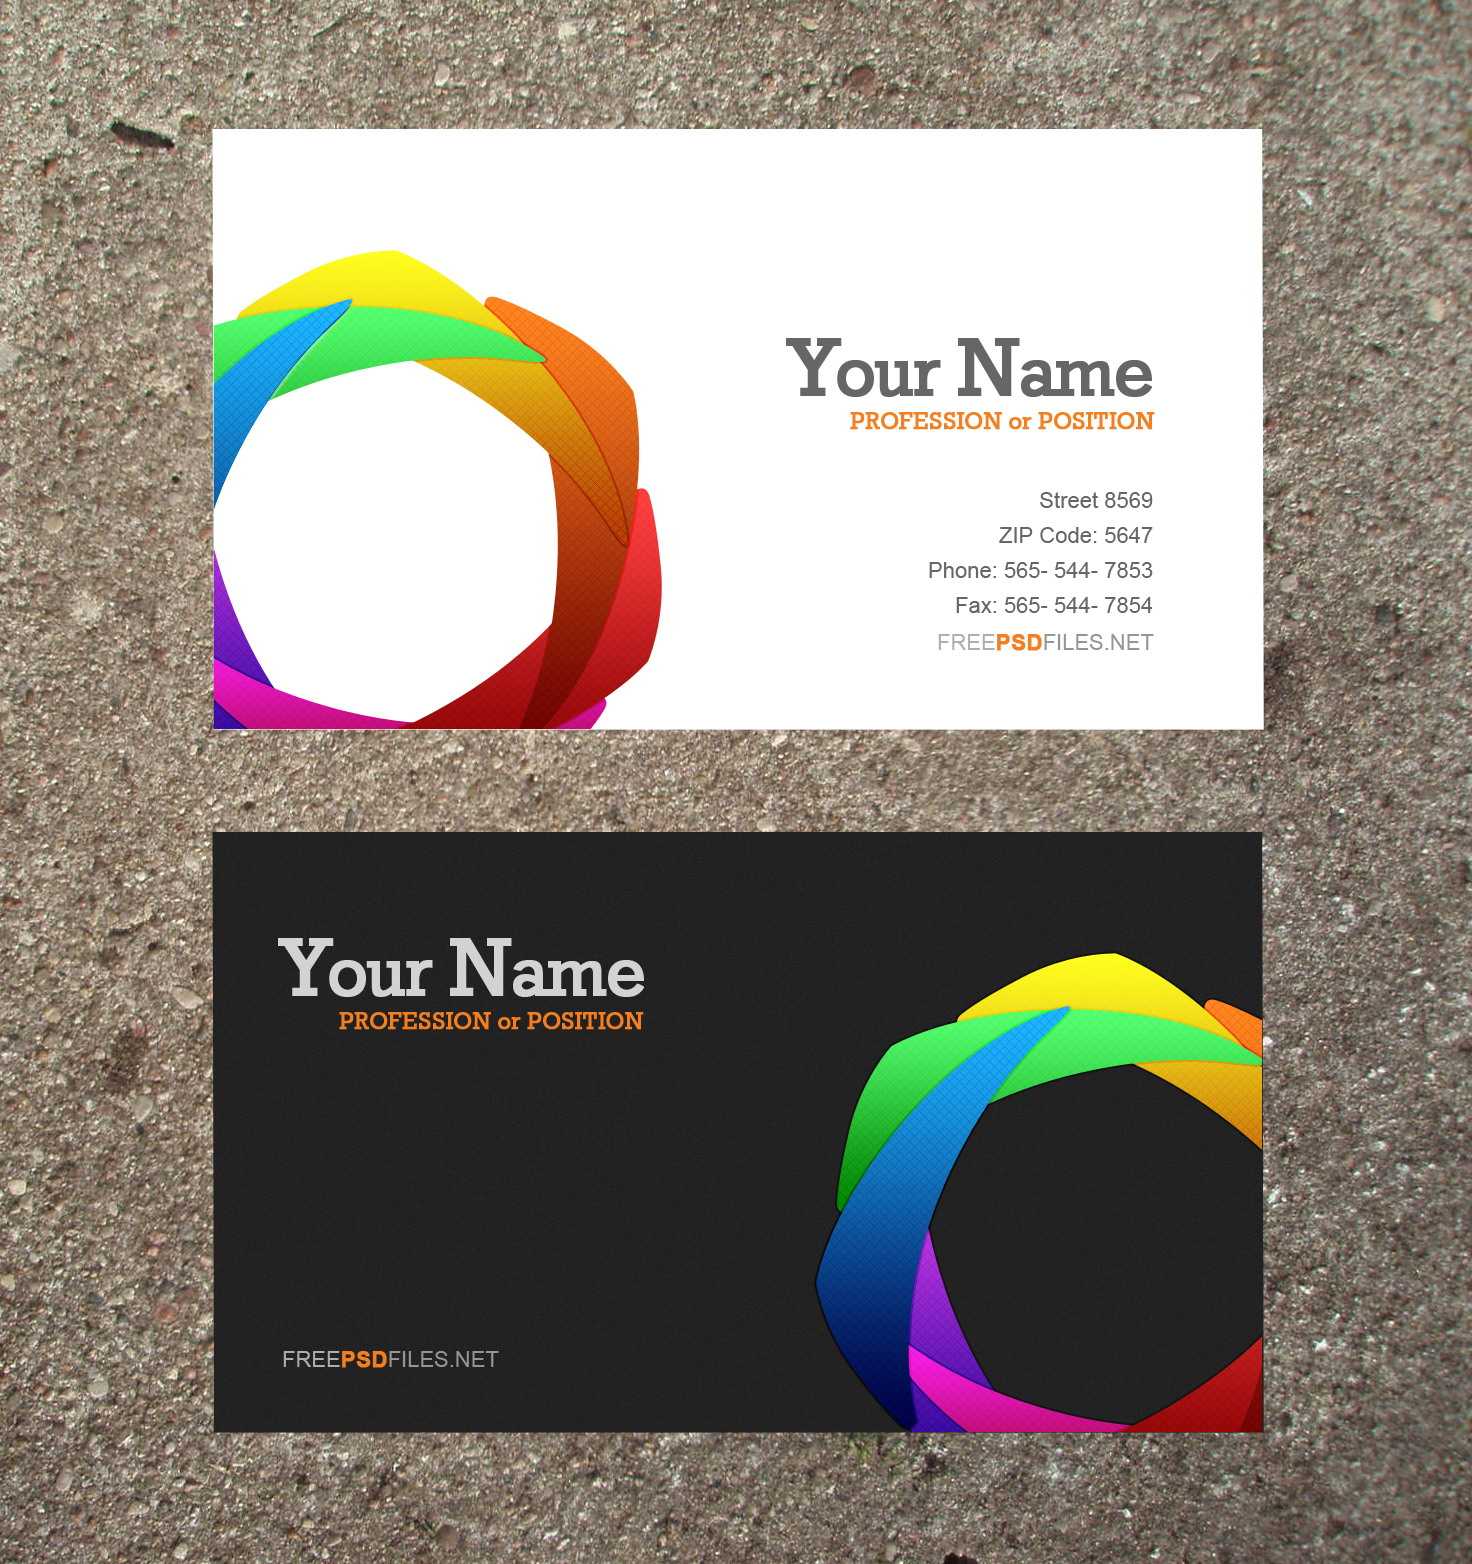 Stunning Cliparts | Clipart Business Card Software Templates With Blank Business Card Template Download